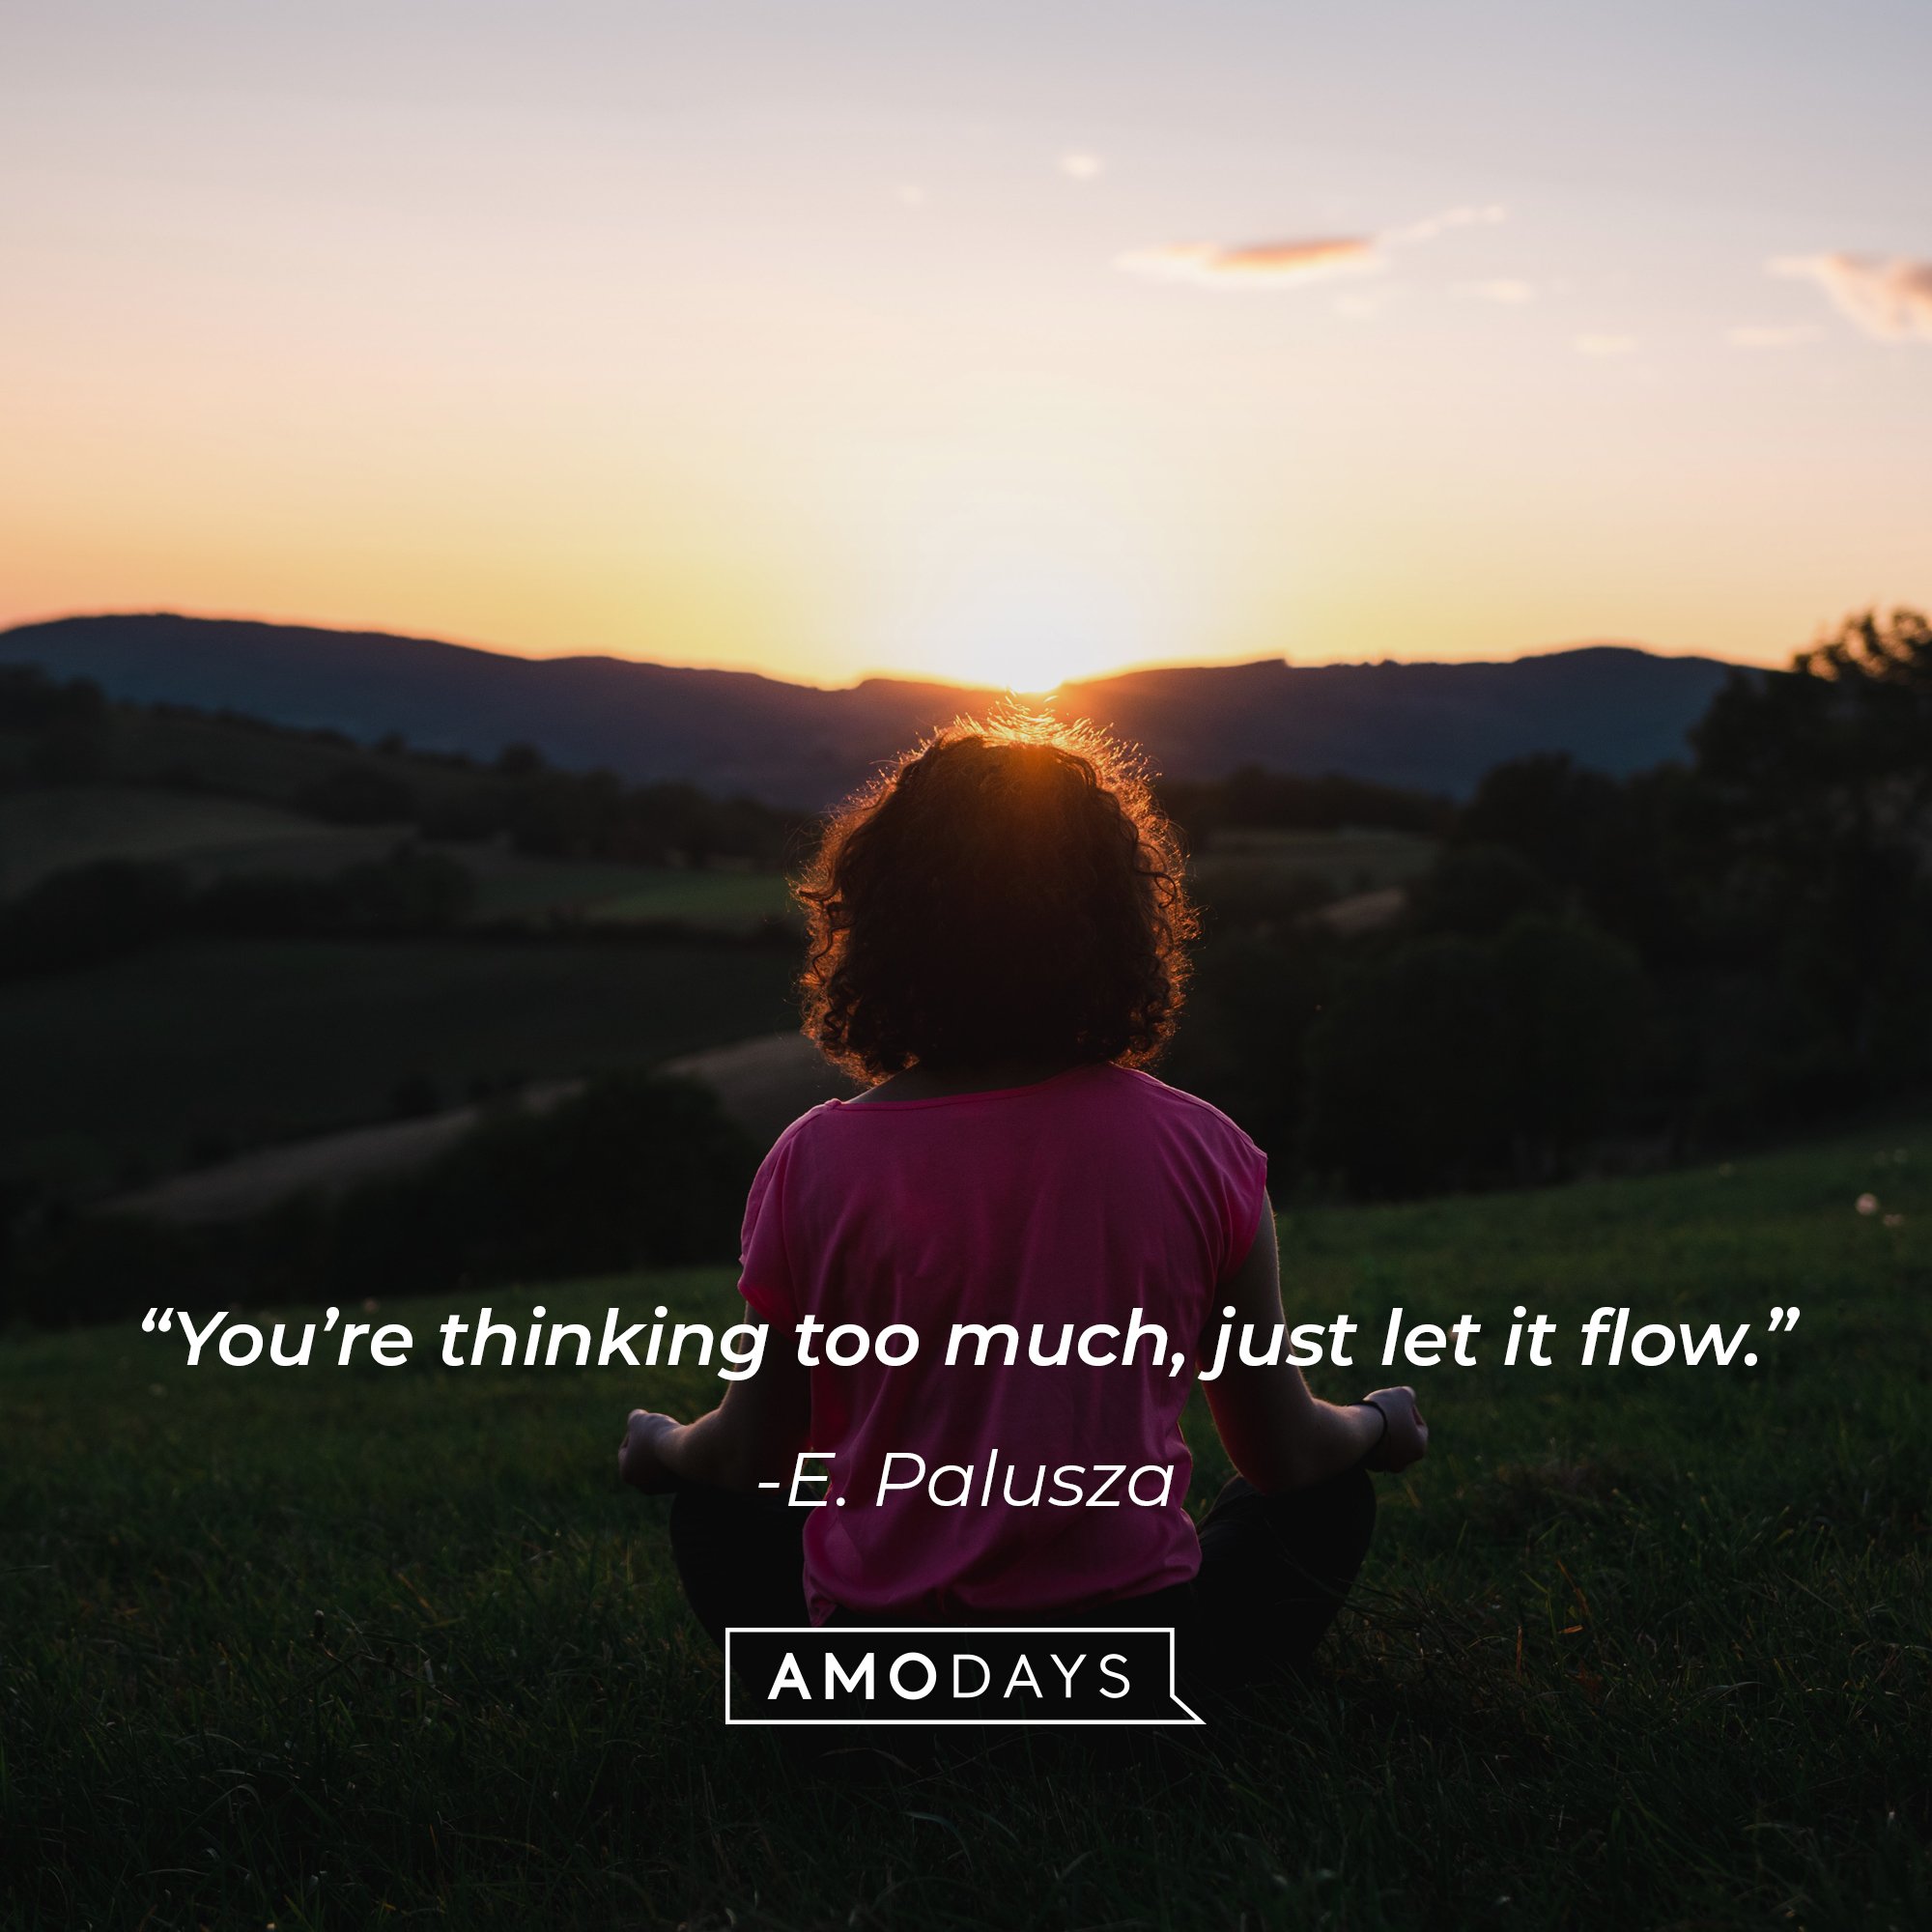 E. Palusza’s quote: "You're thinking too much; just let it flow." | Image: AmoDays